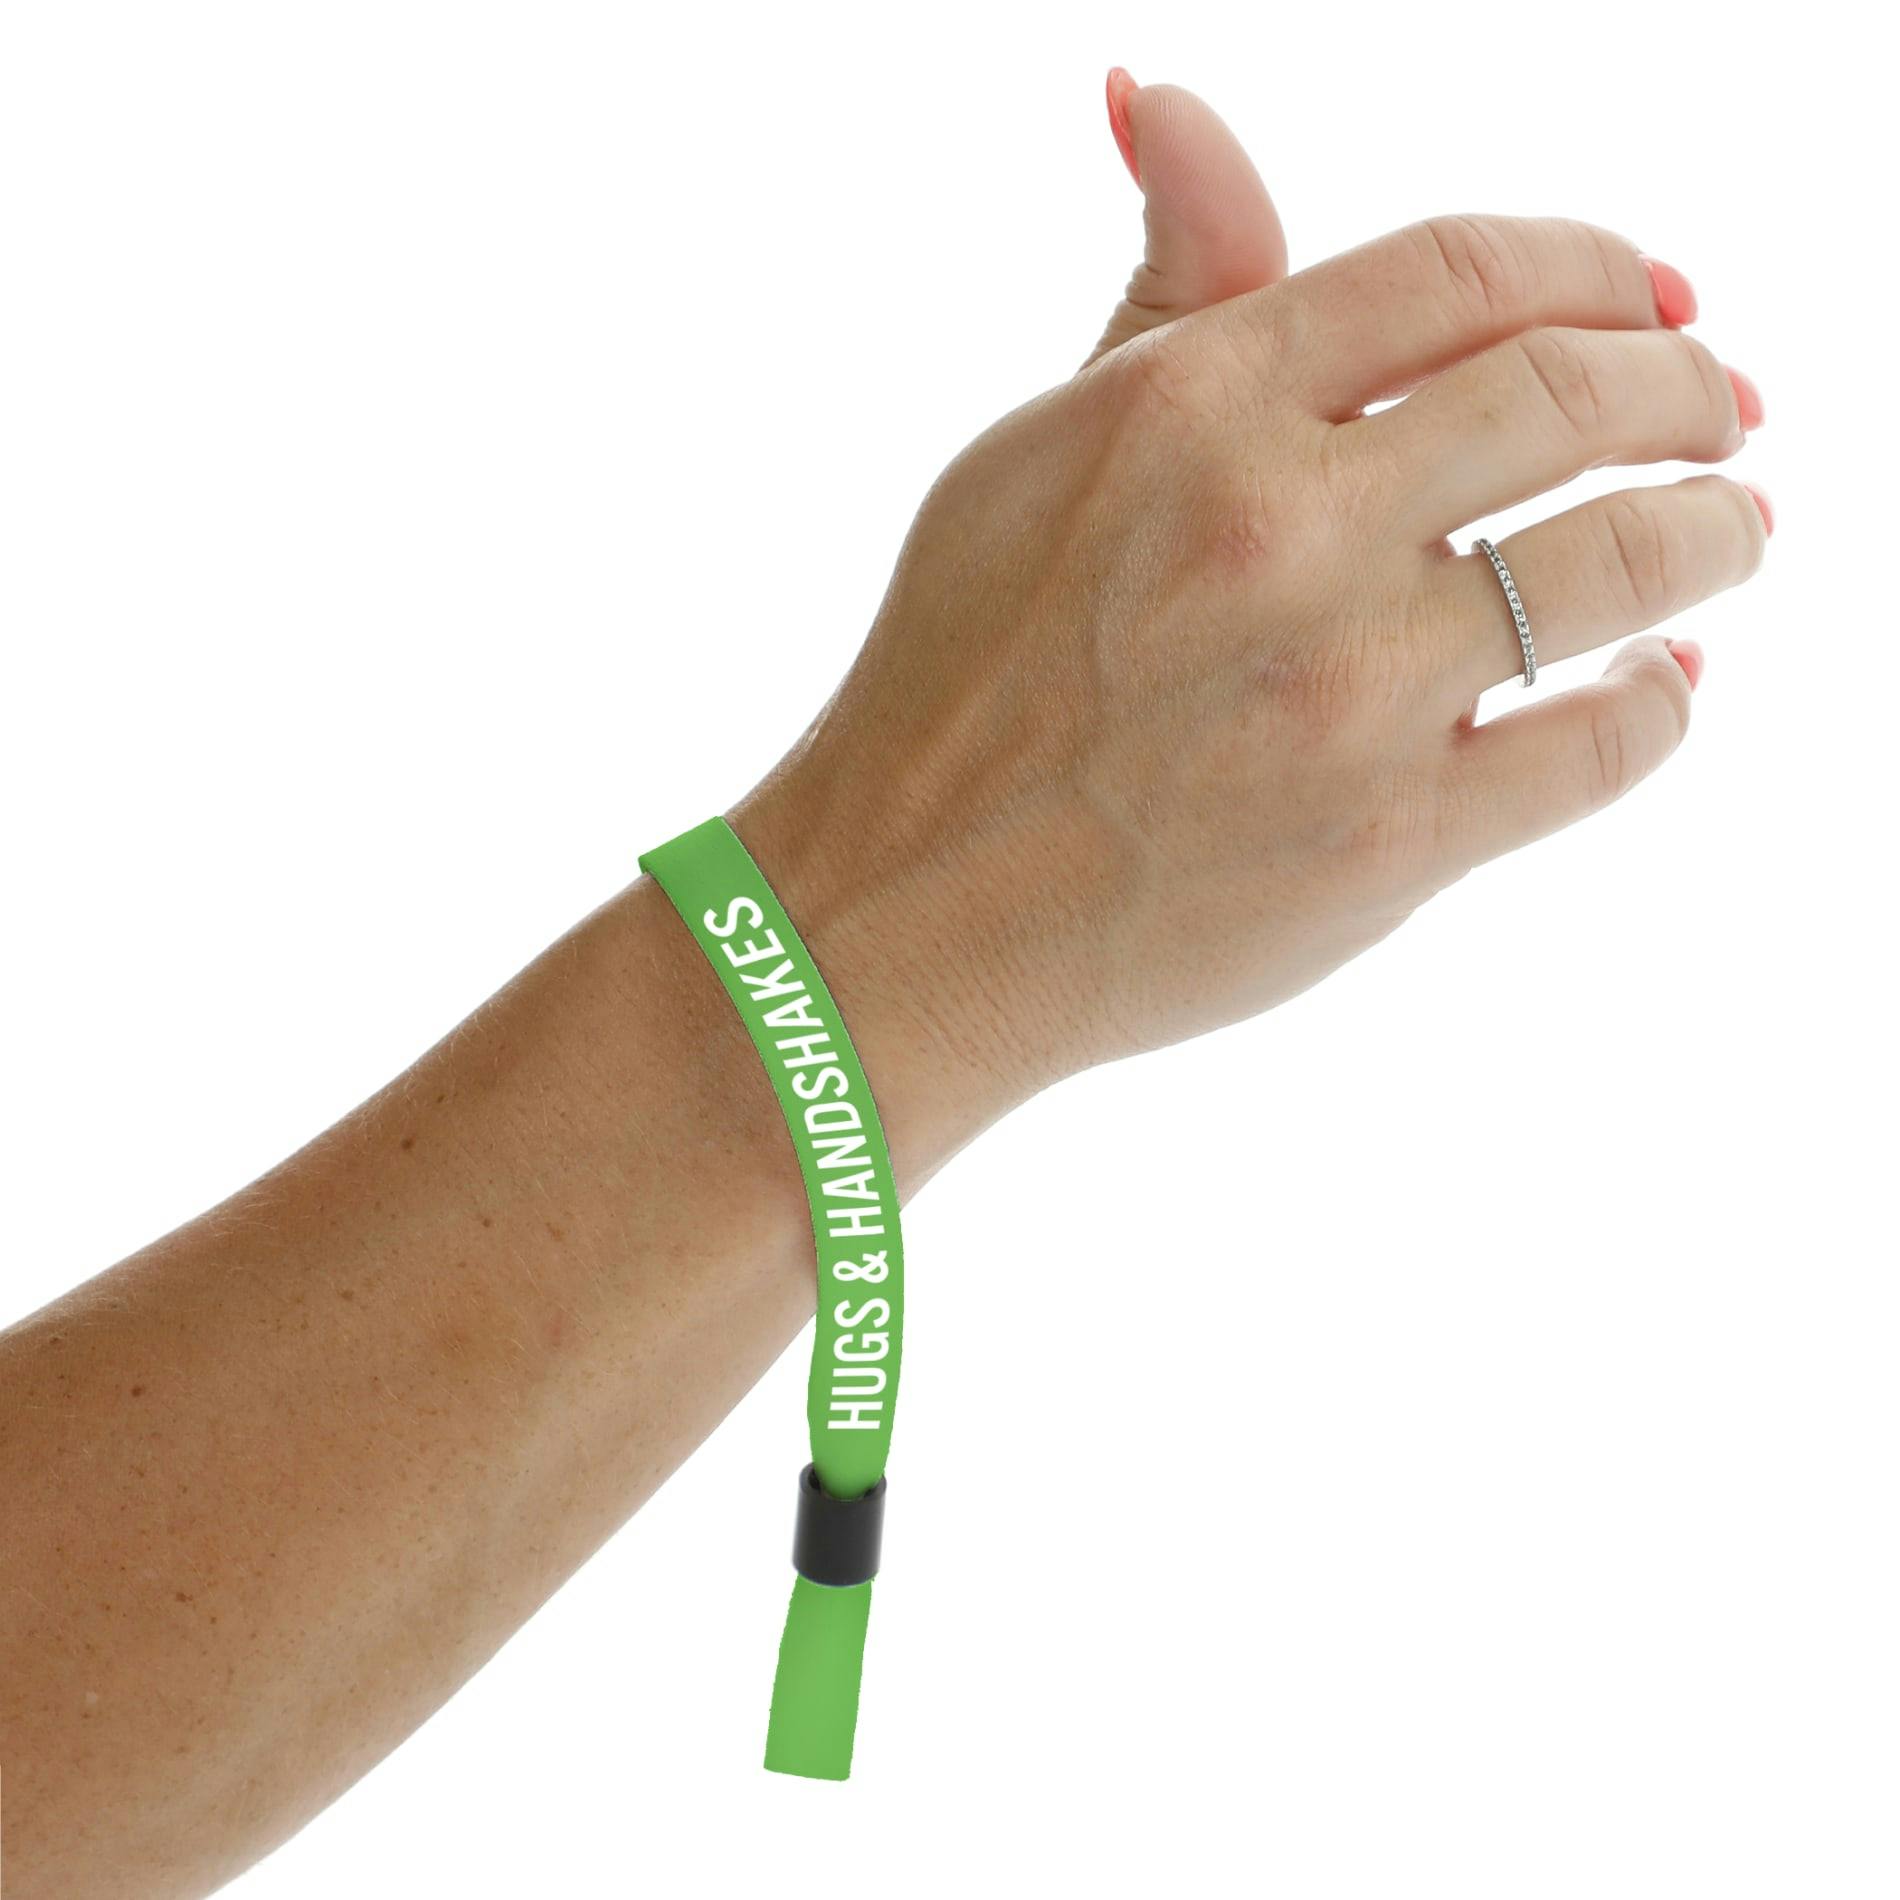 Full Color 1/2" Social Distancing Wristband - additional Image 4